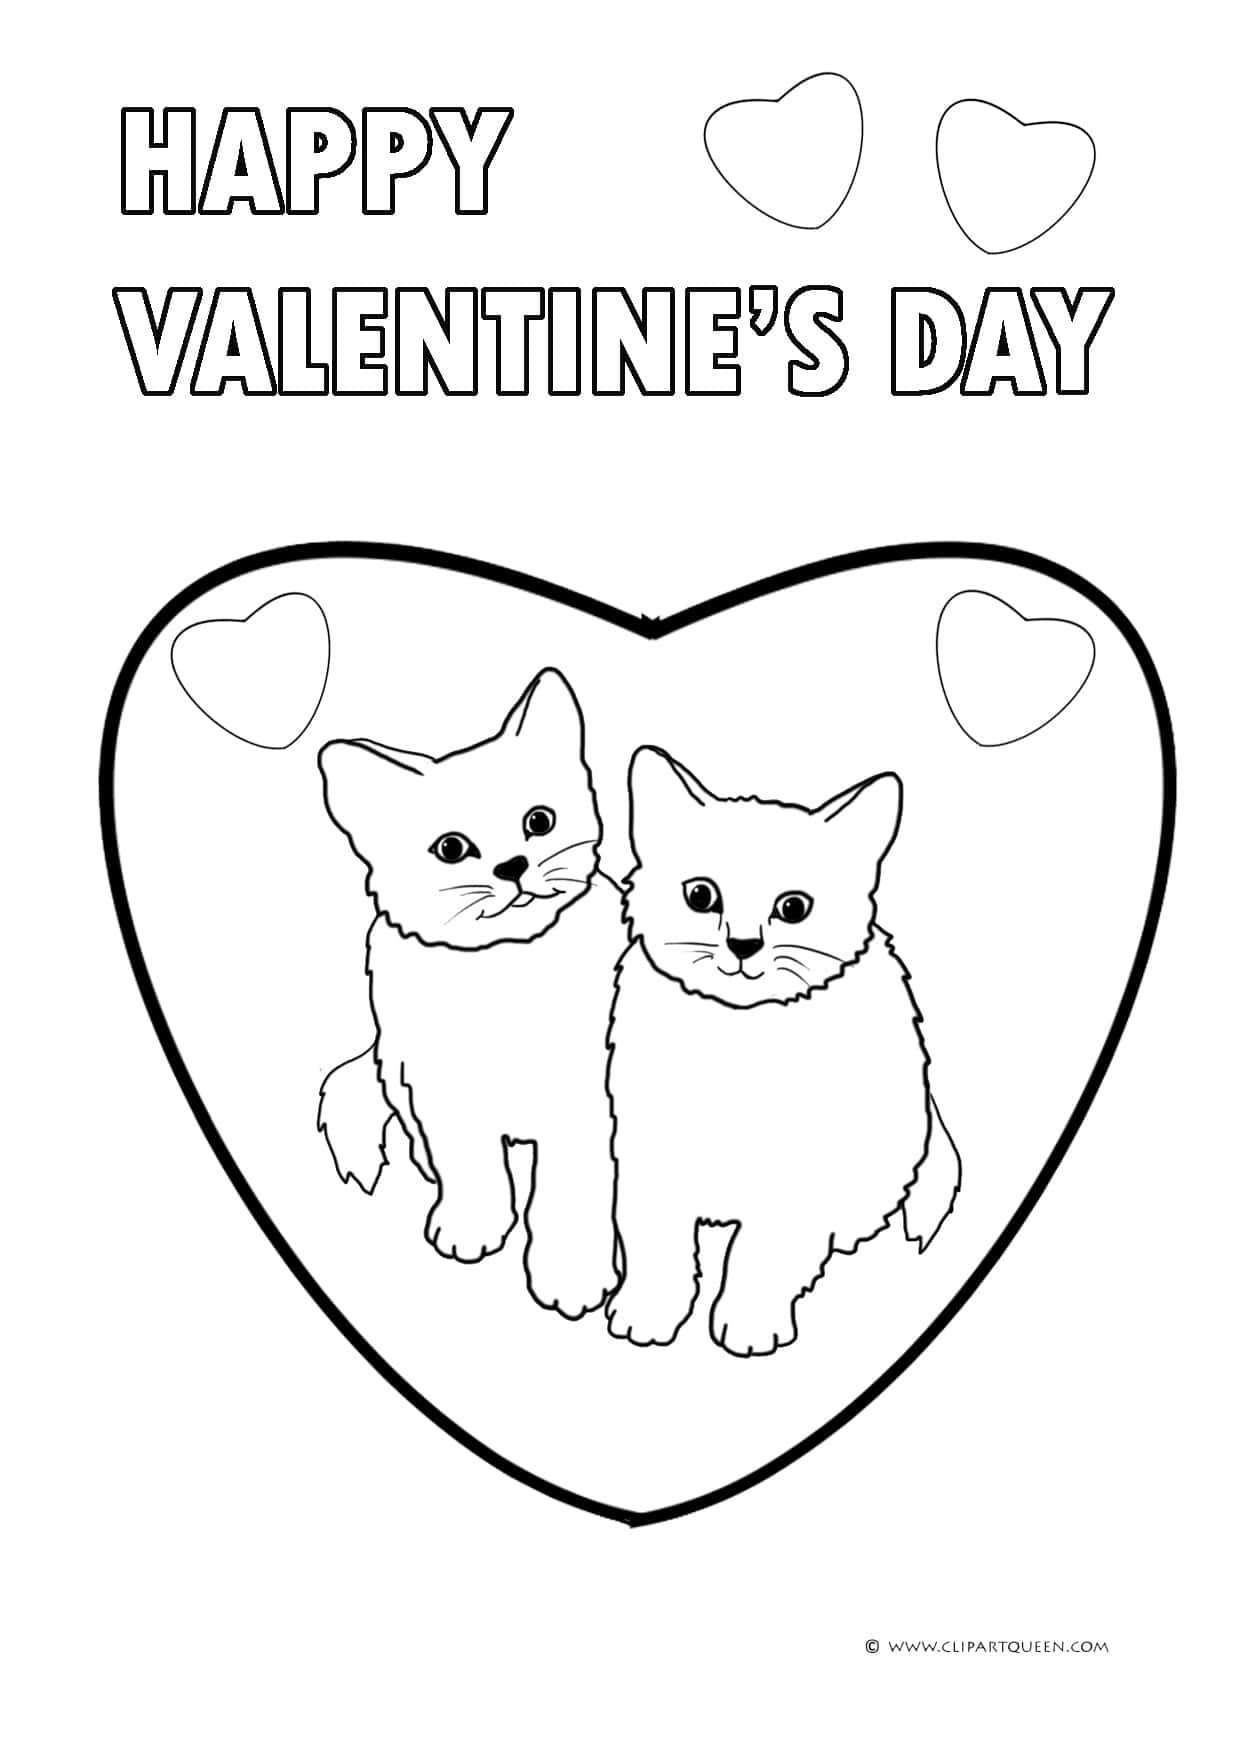 Two Cats In A Heart Coloring Page